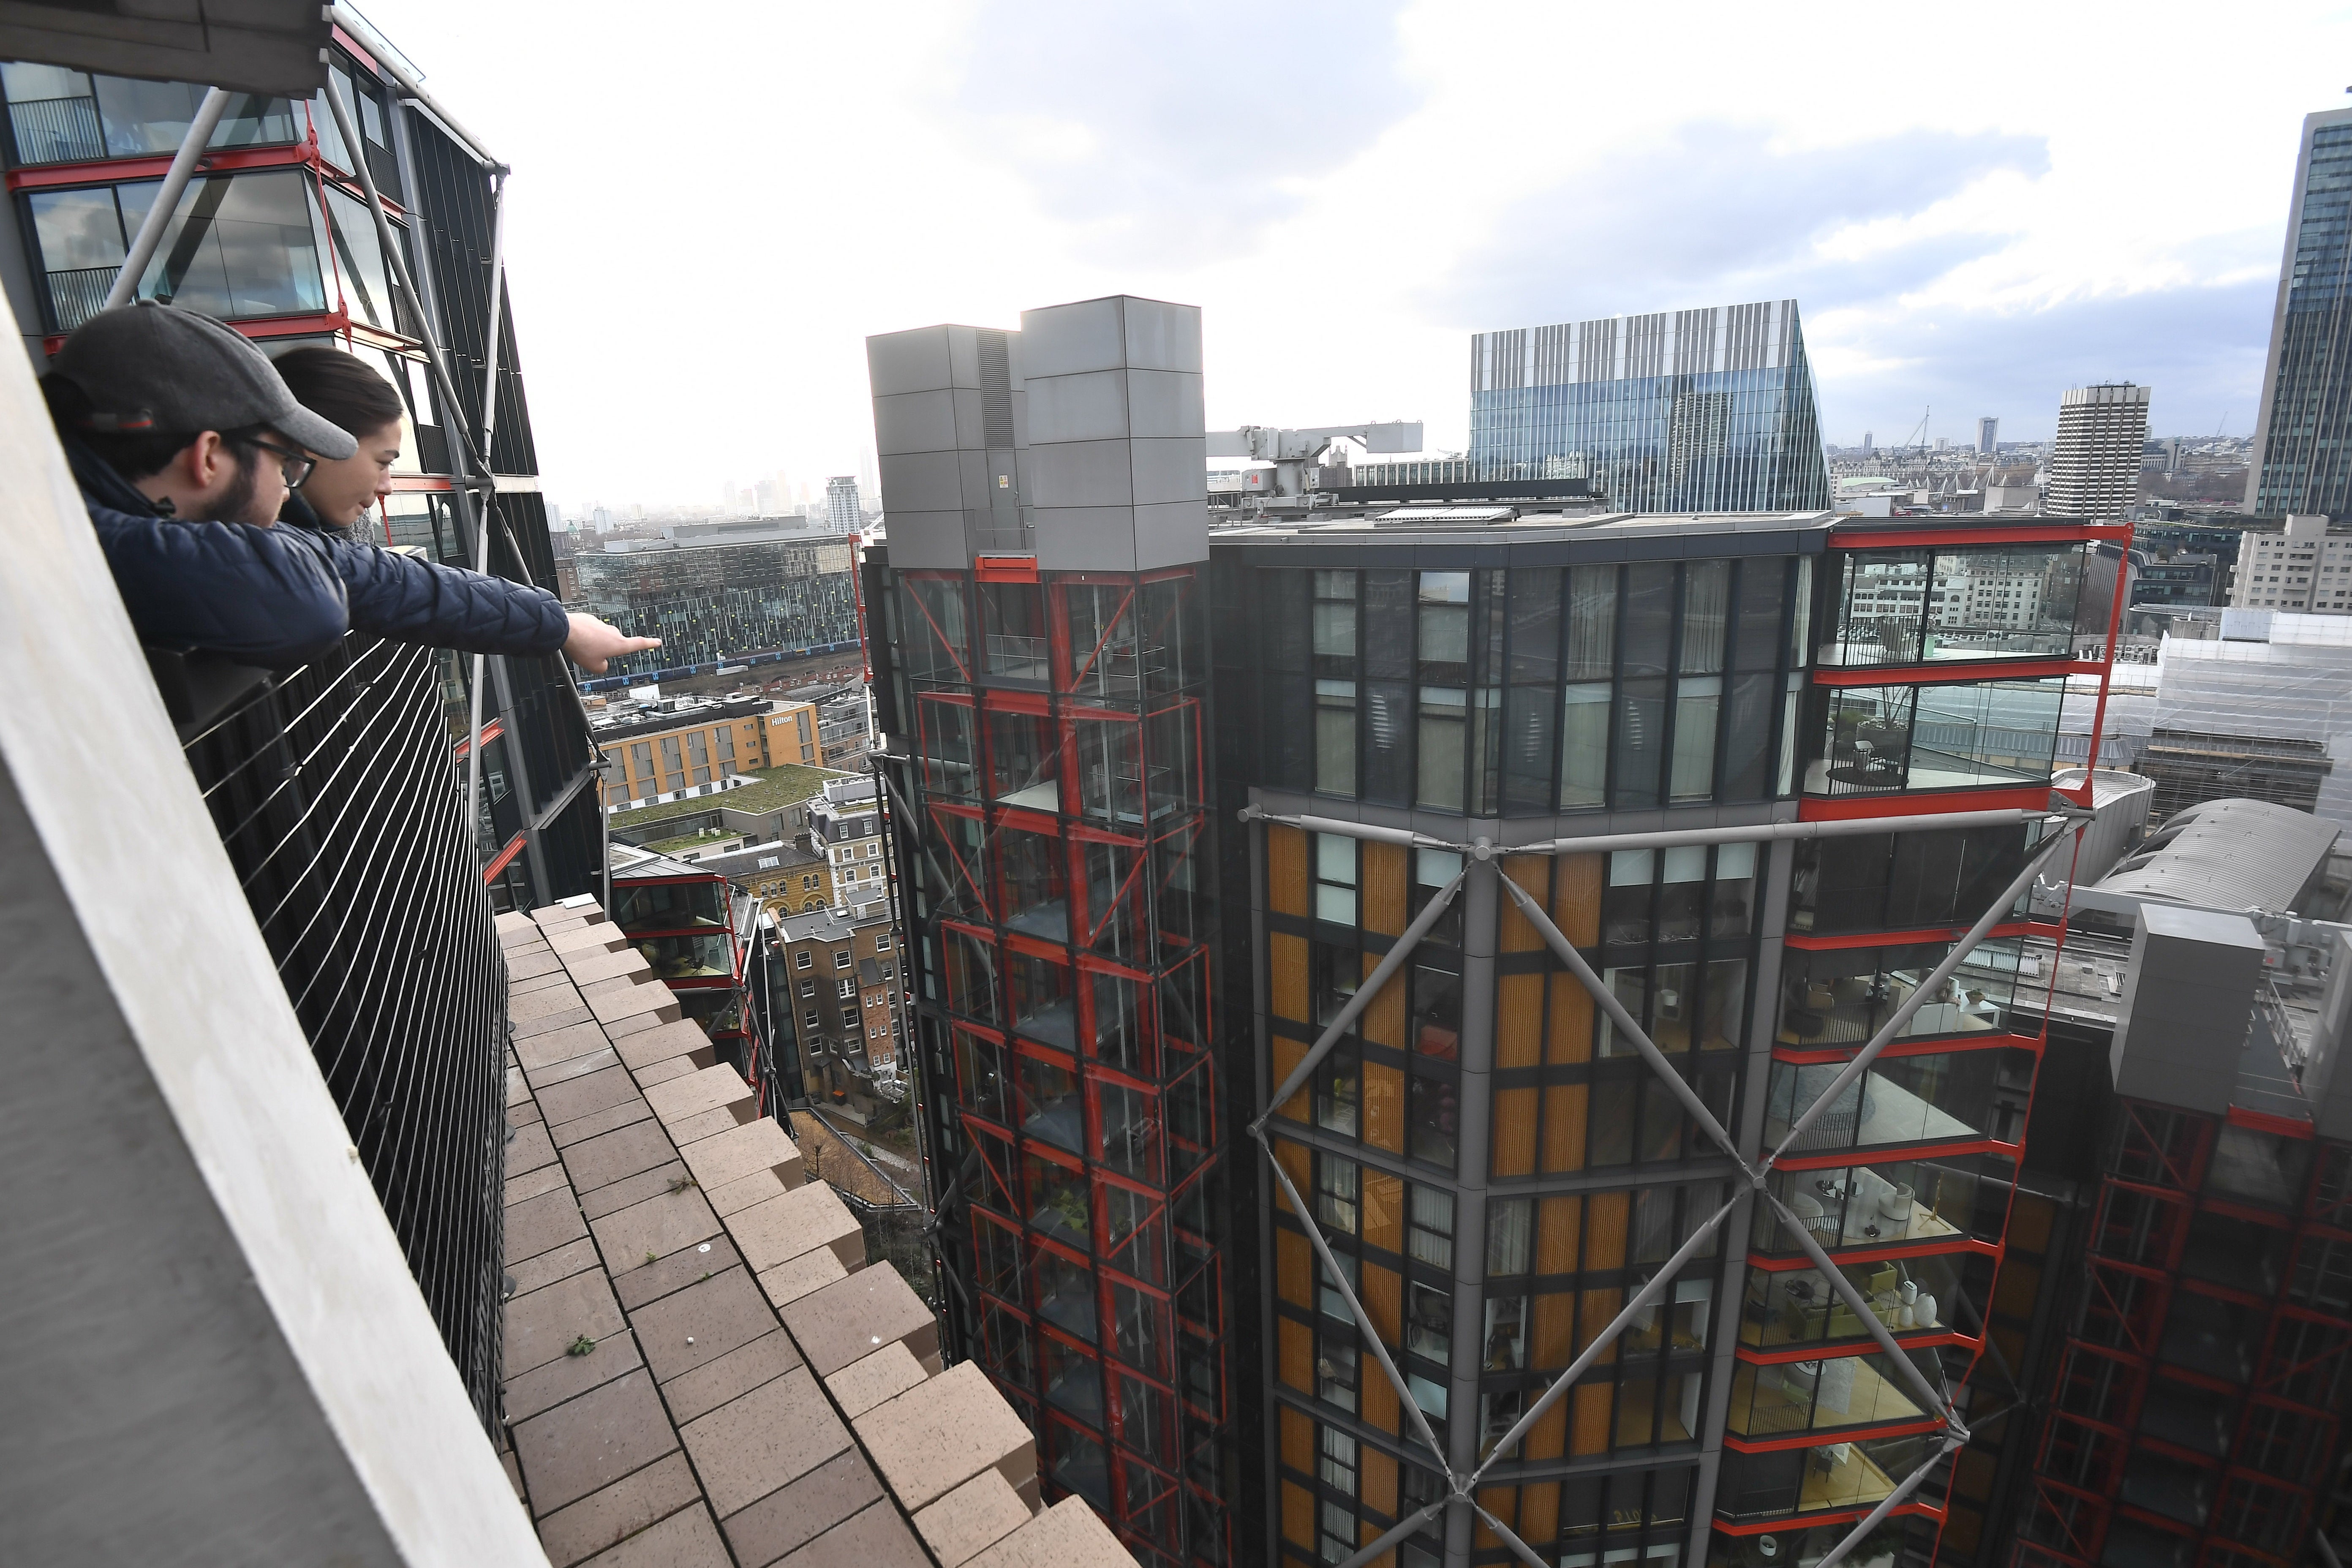 People look out from the viewing platform at Tate Modern, left, which overlooks the residential flats